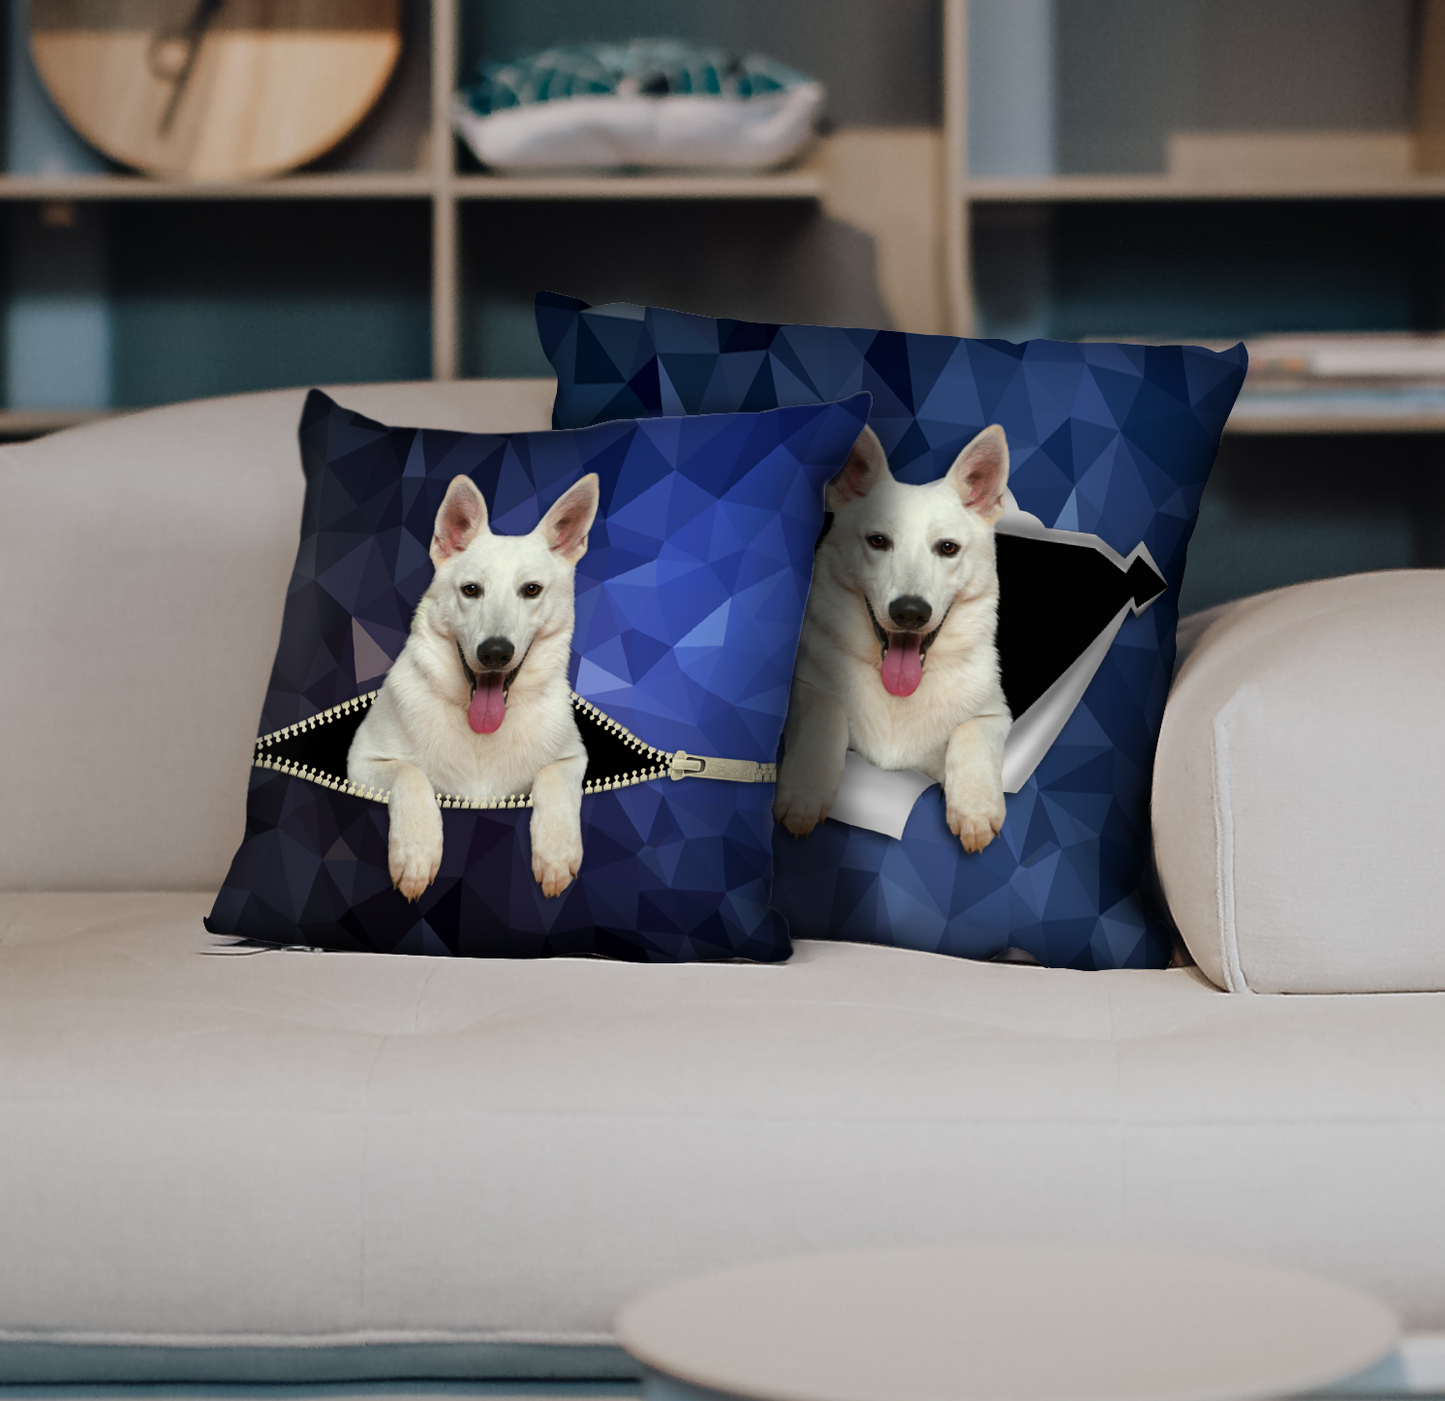 They Steal Your Couch - Berger Blanc Suisse Pillow Cases V1 (Set of 2)